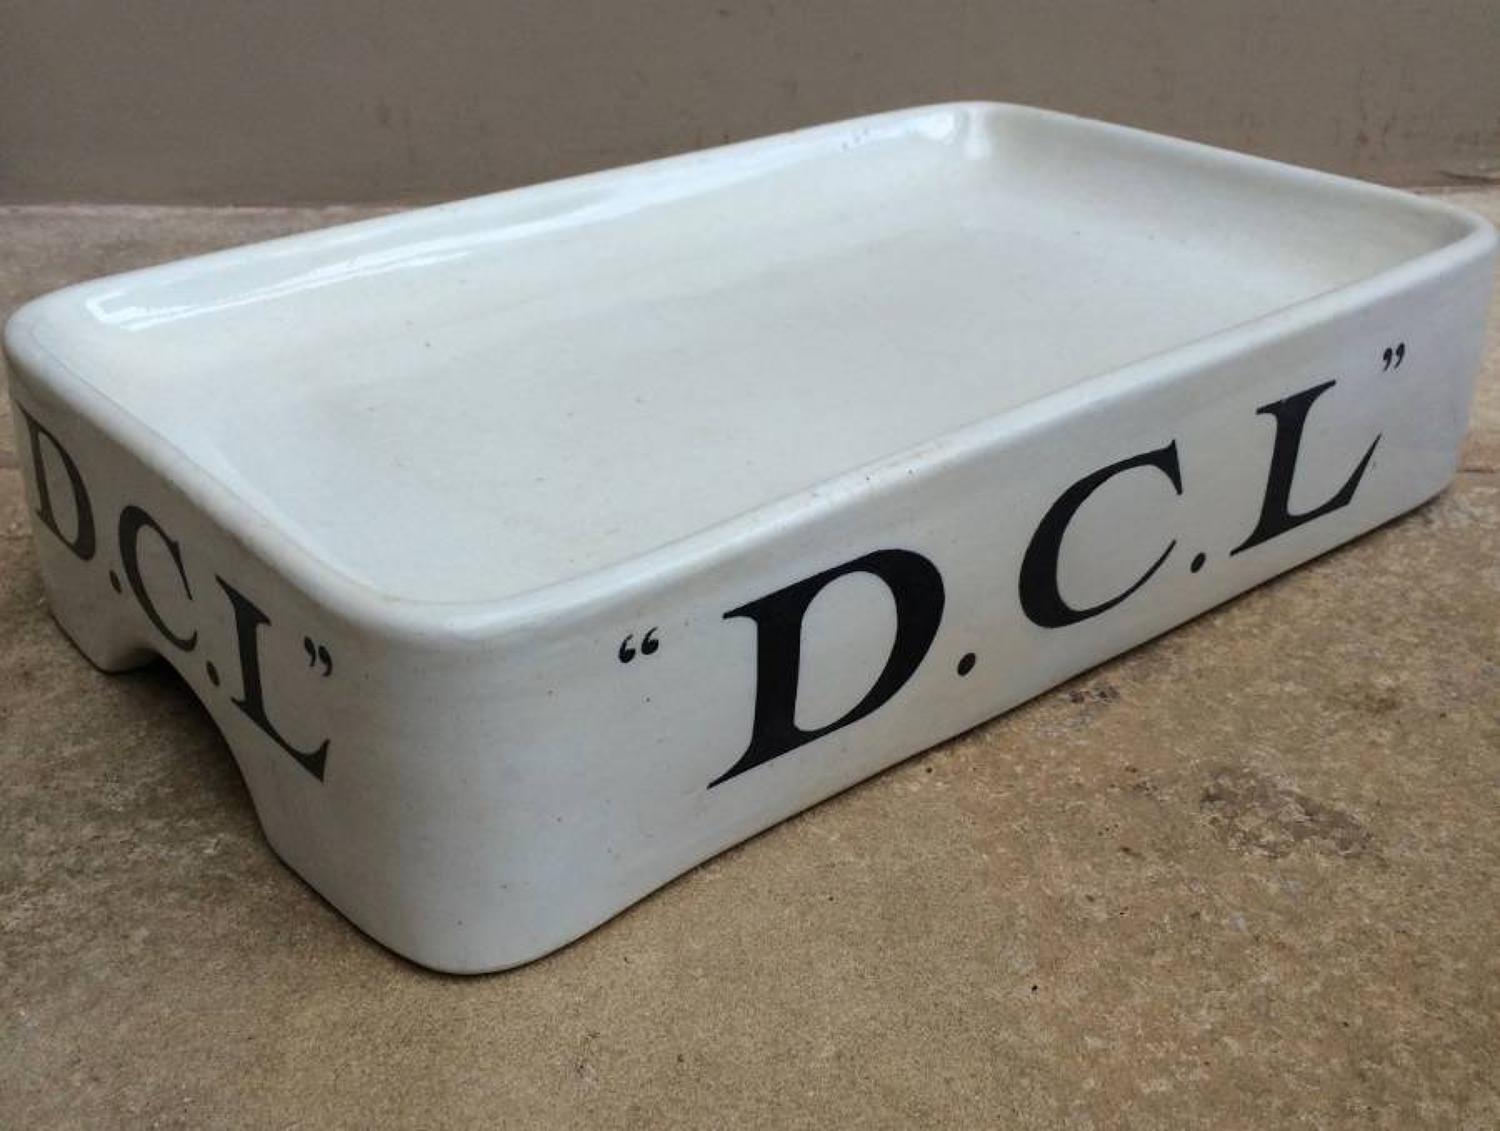 Rare Edwardian Grocers Slab - DCL Yeast